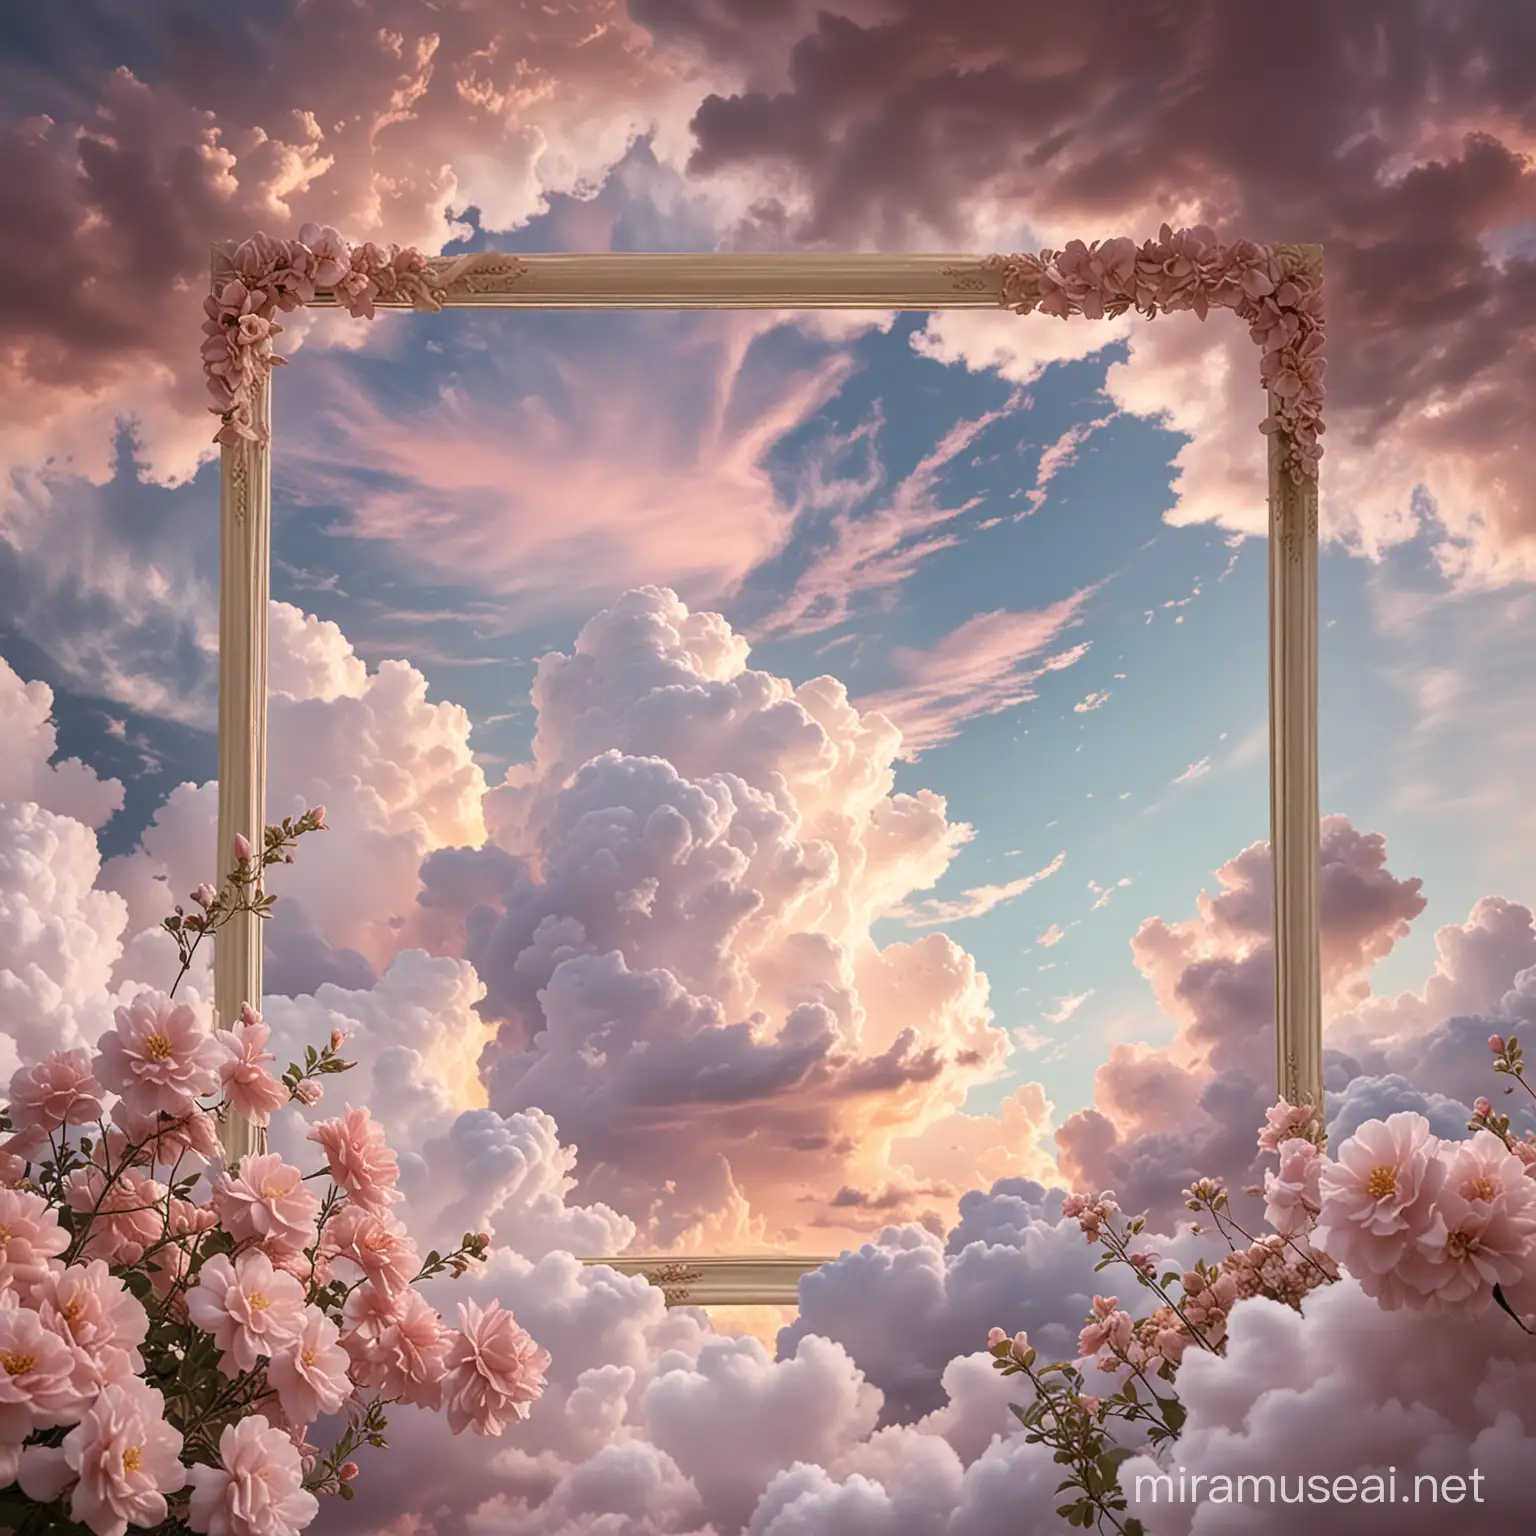 a serene scene where soft, billowing clouds of pastel colors envelop the frame. Amidst these clouds, delicate and velvety flowers float gently, emitting a soft glow. 